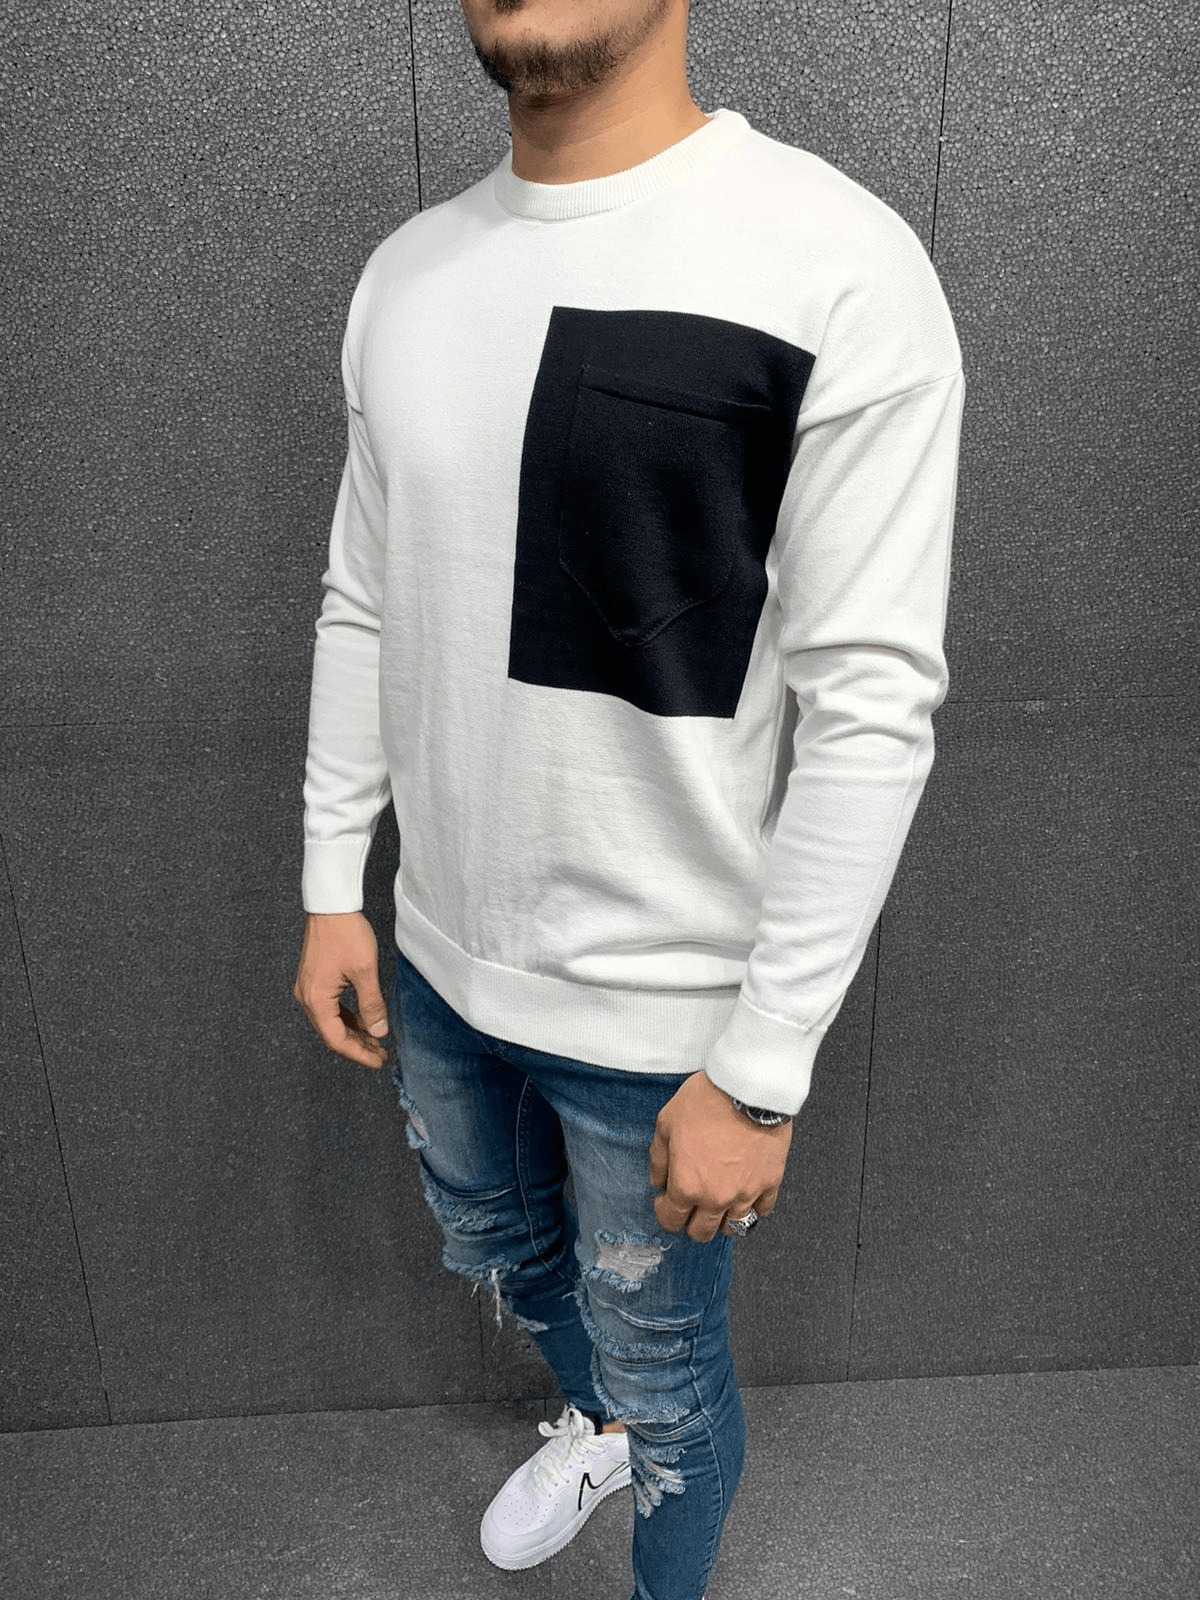 Nouvelle collection: Pull blanc | Mode Urbaine 29,90€